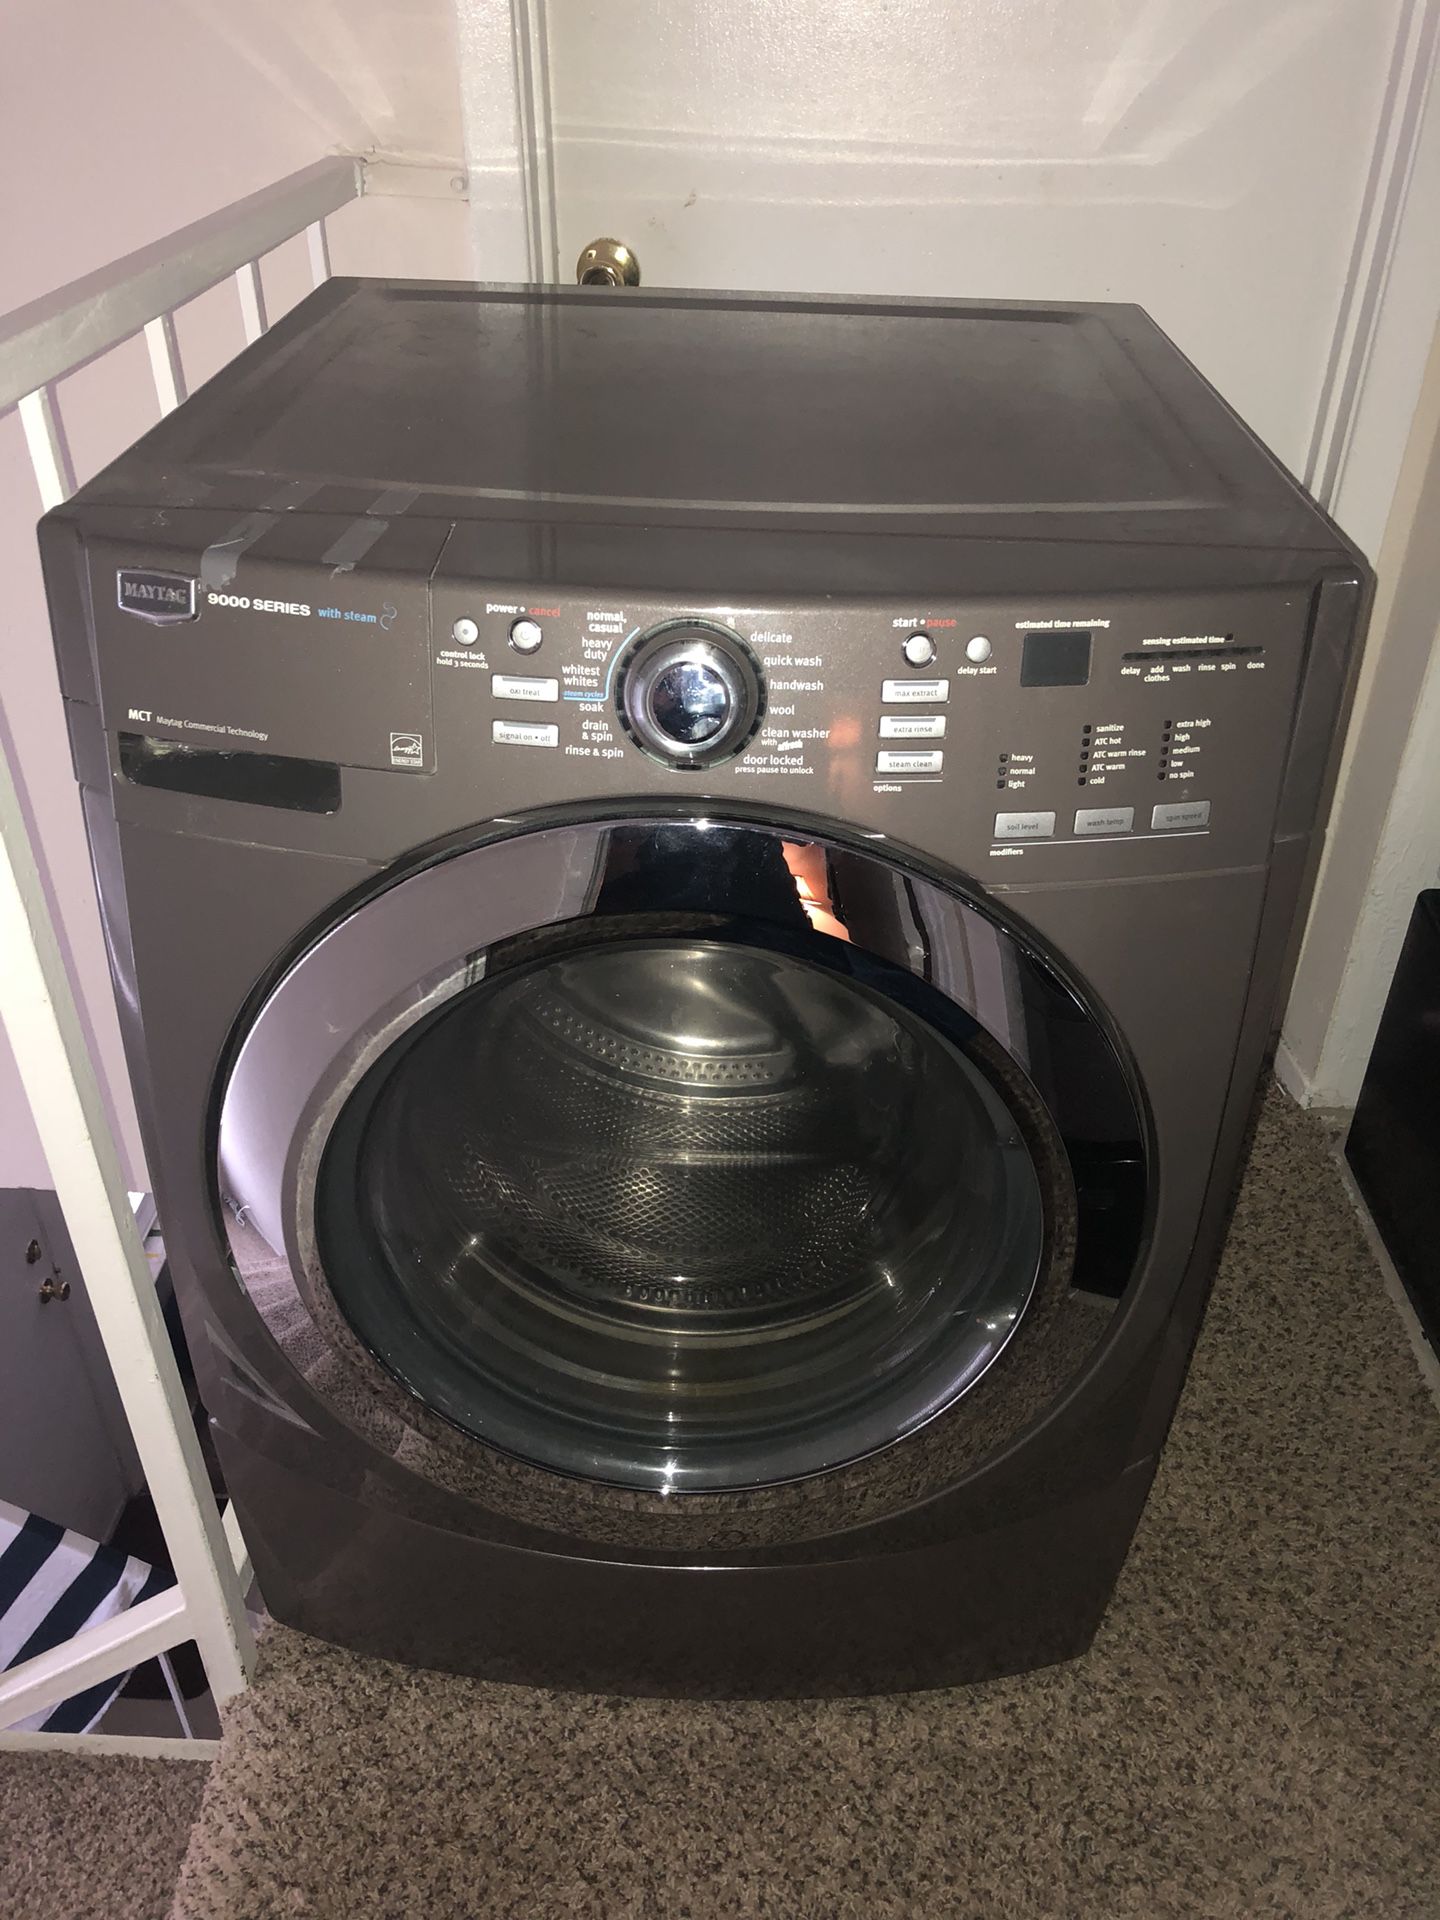 WASHER MAYTAG 9000 Series with Steam